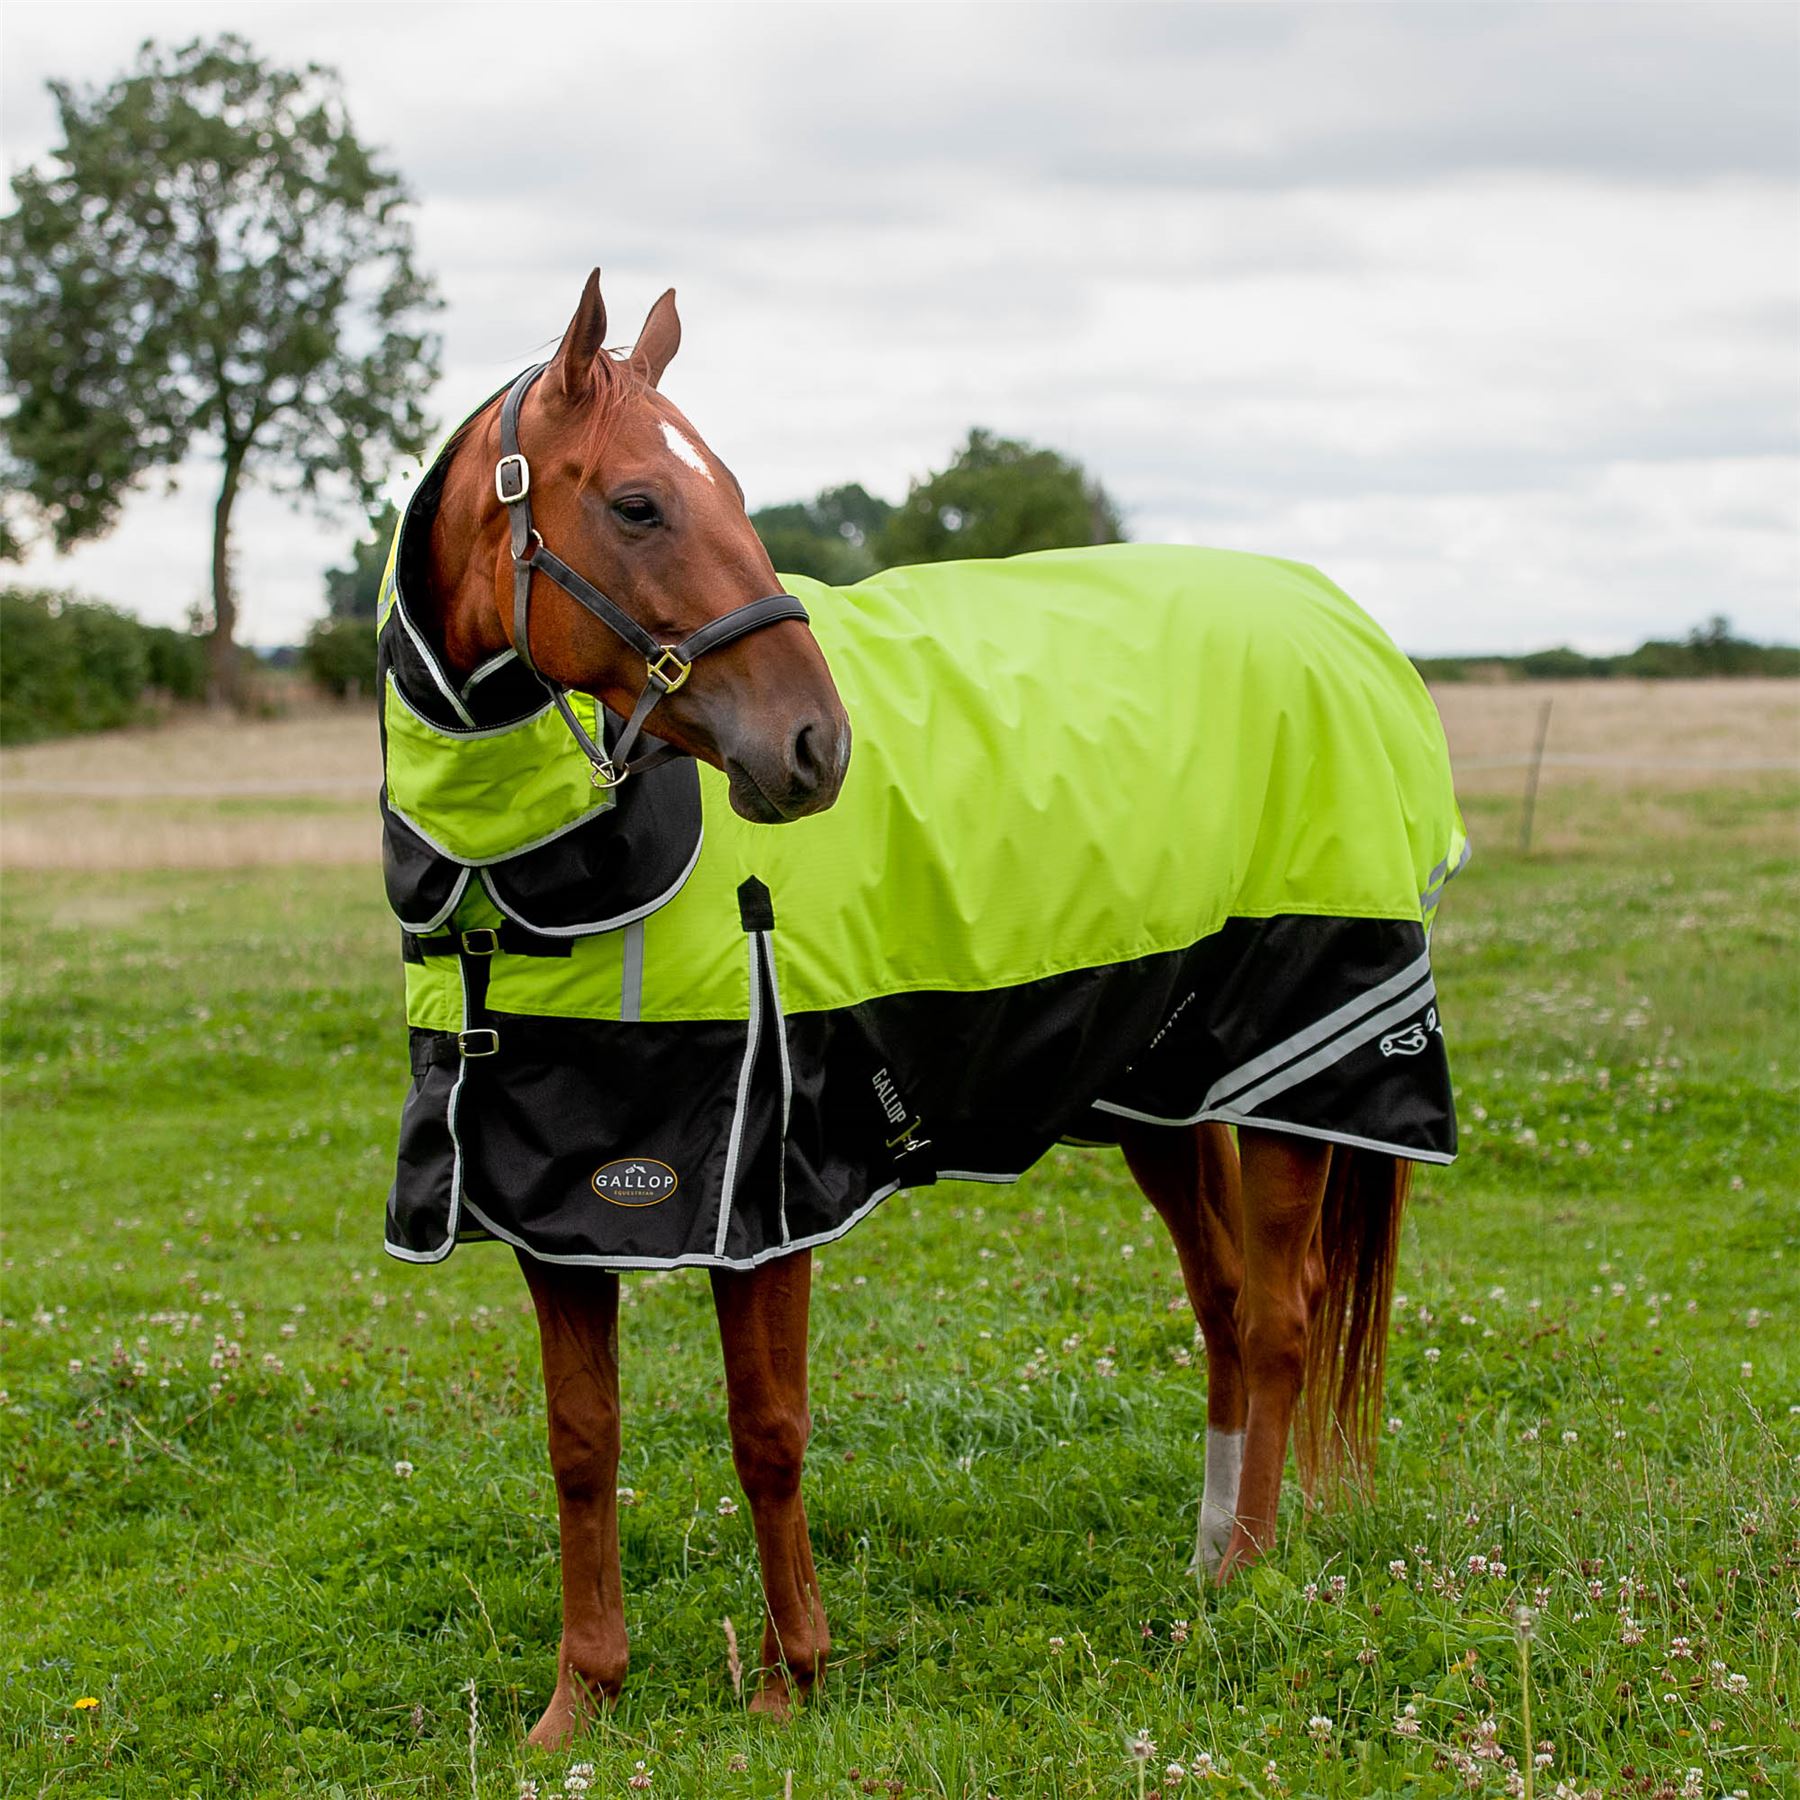 Gallop Equestrian Hi Vis 200G Combo Turnout Rug - Just Horse Riders